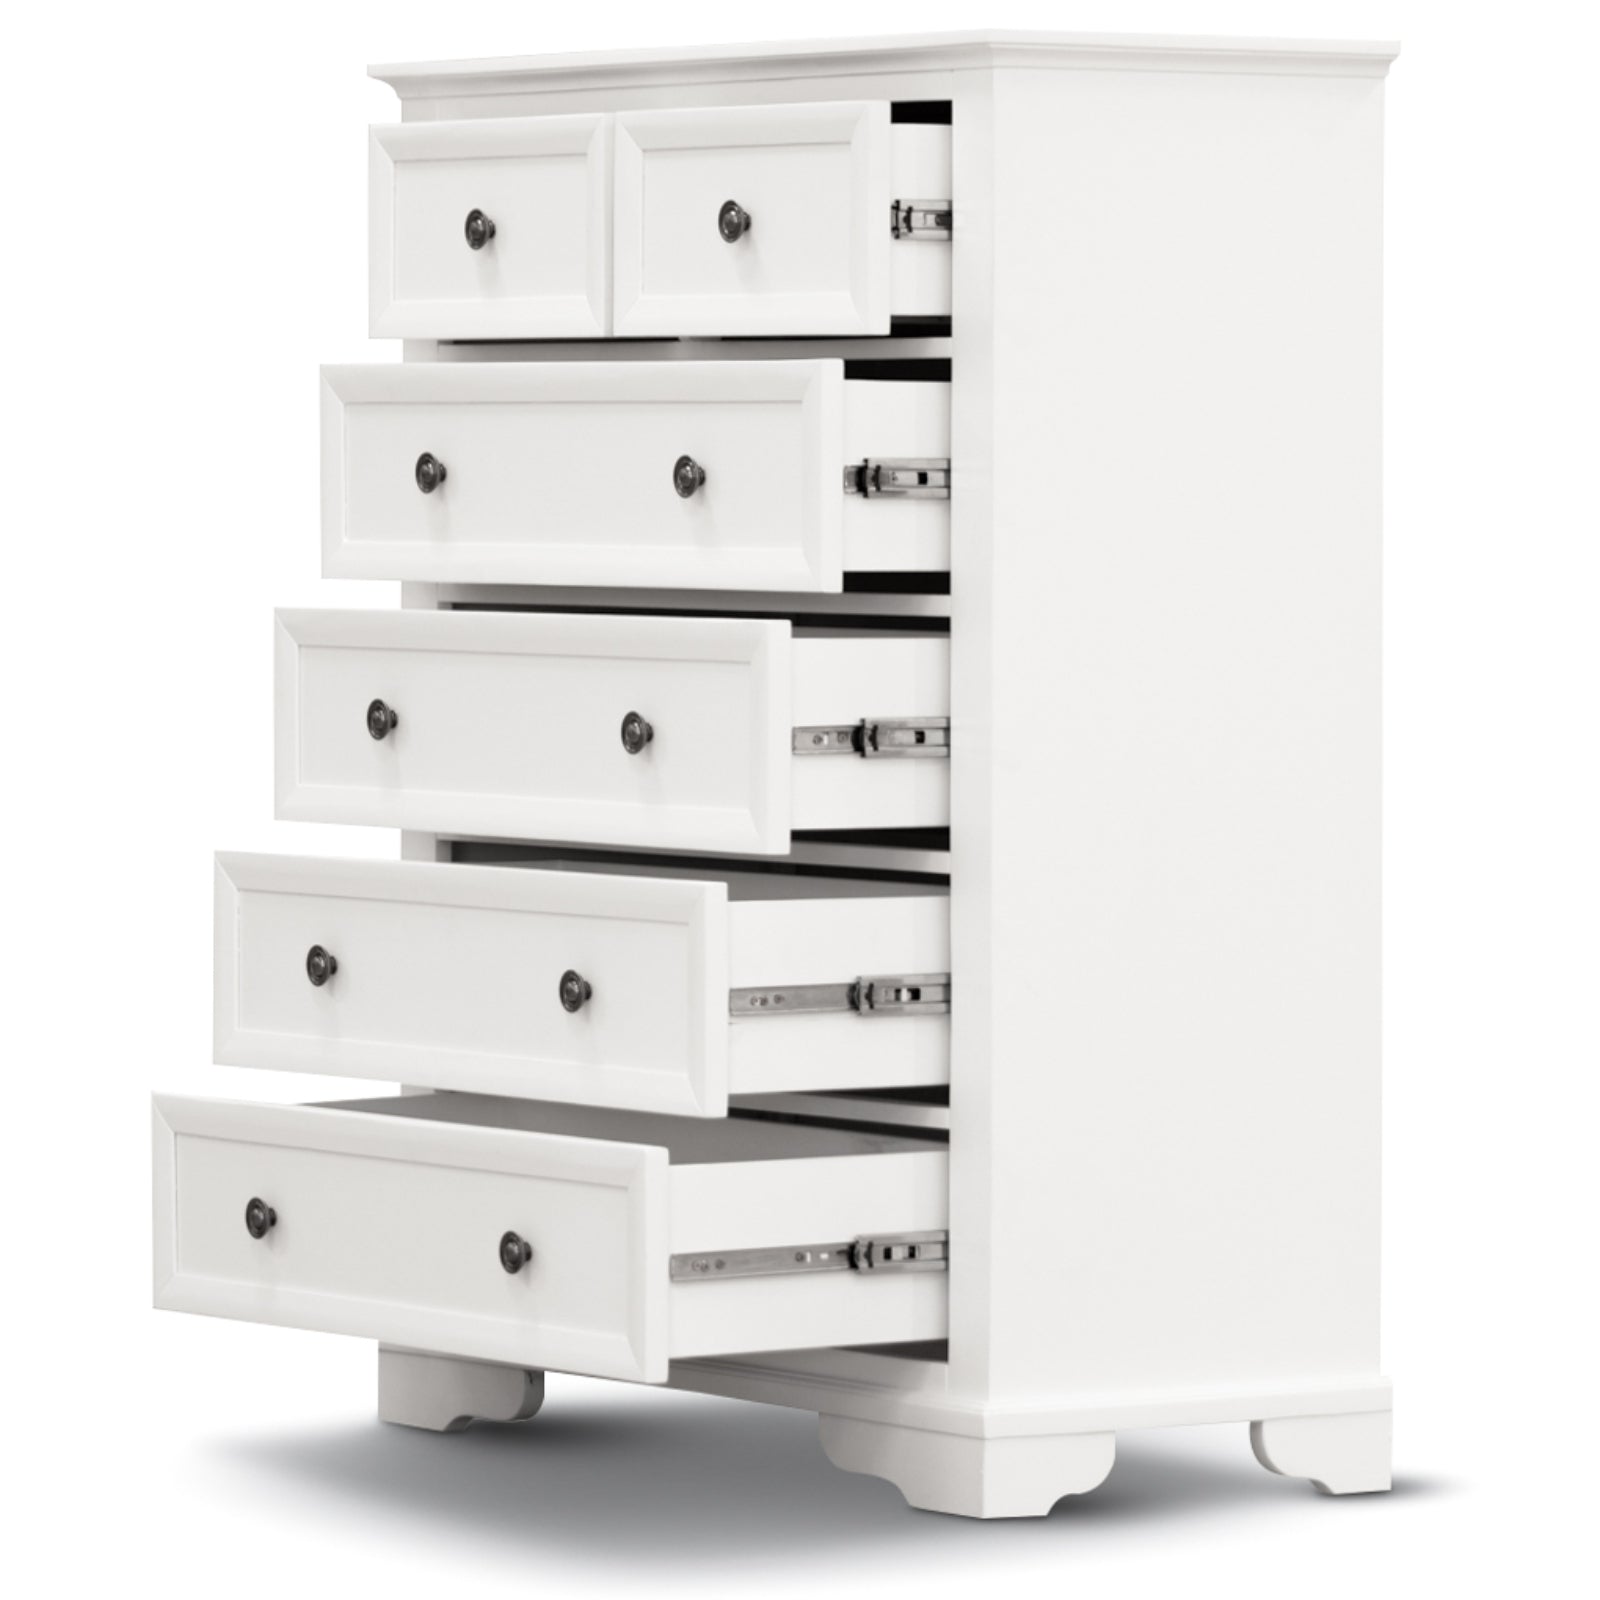 Celosia 2pc Bedside Tallboy 3pc Bedroom Set Nightstand Storage Cabinet - White - SILBERSHELL